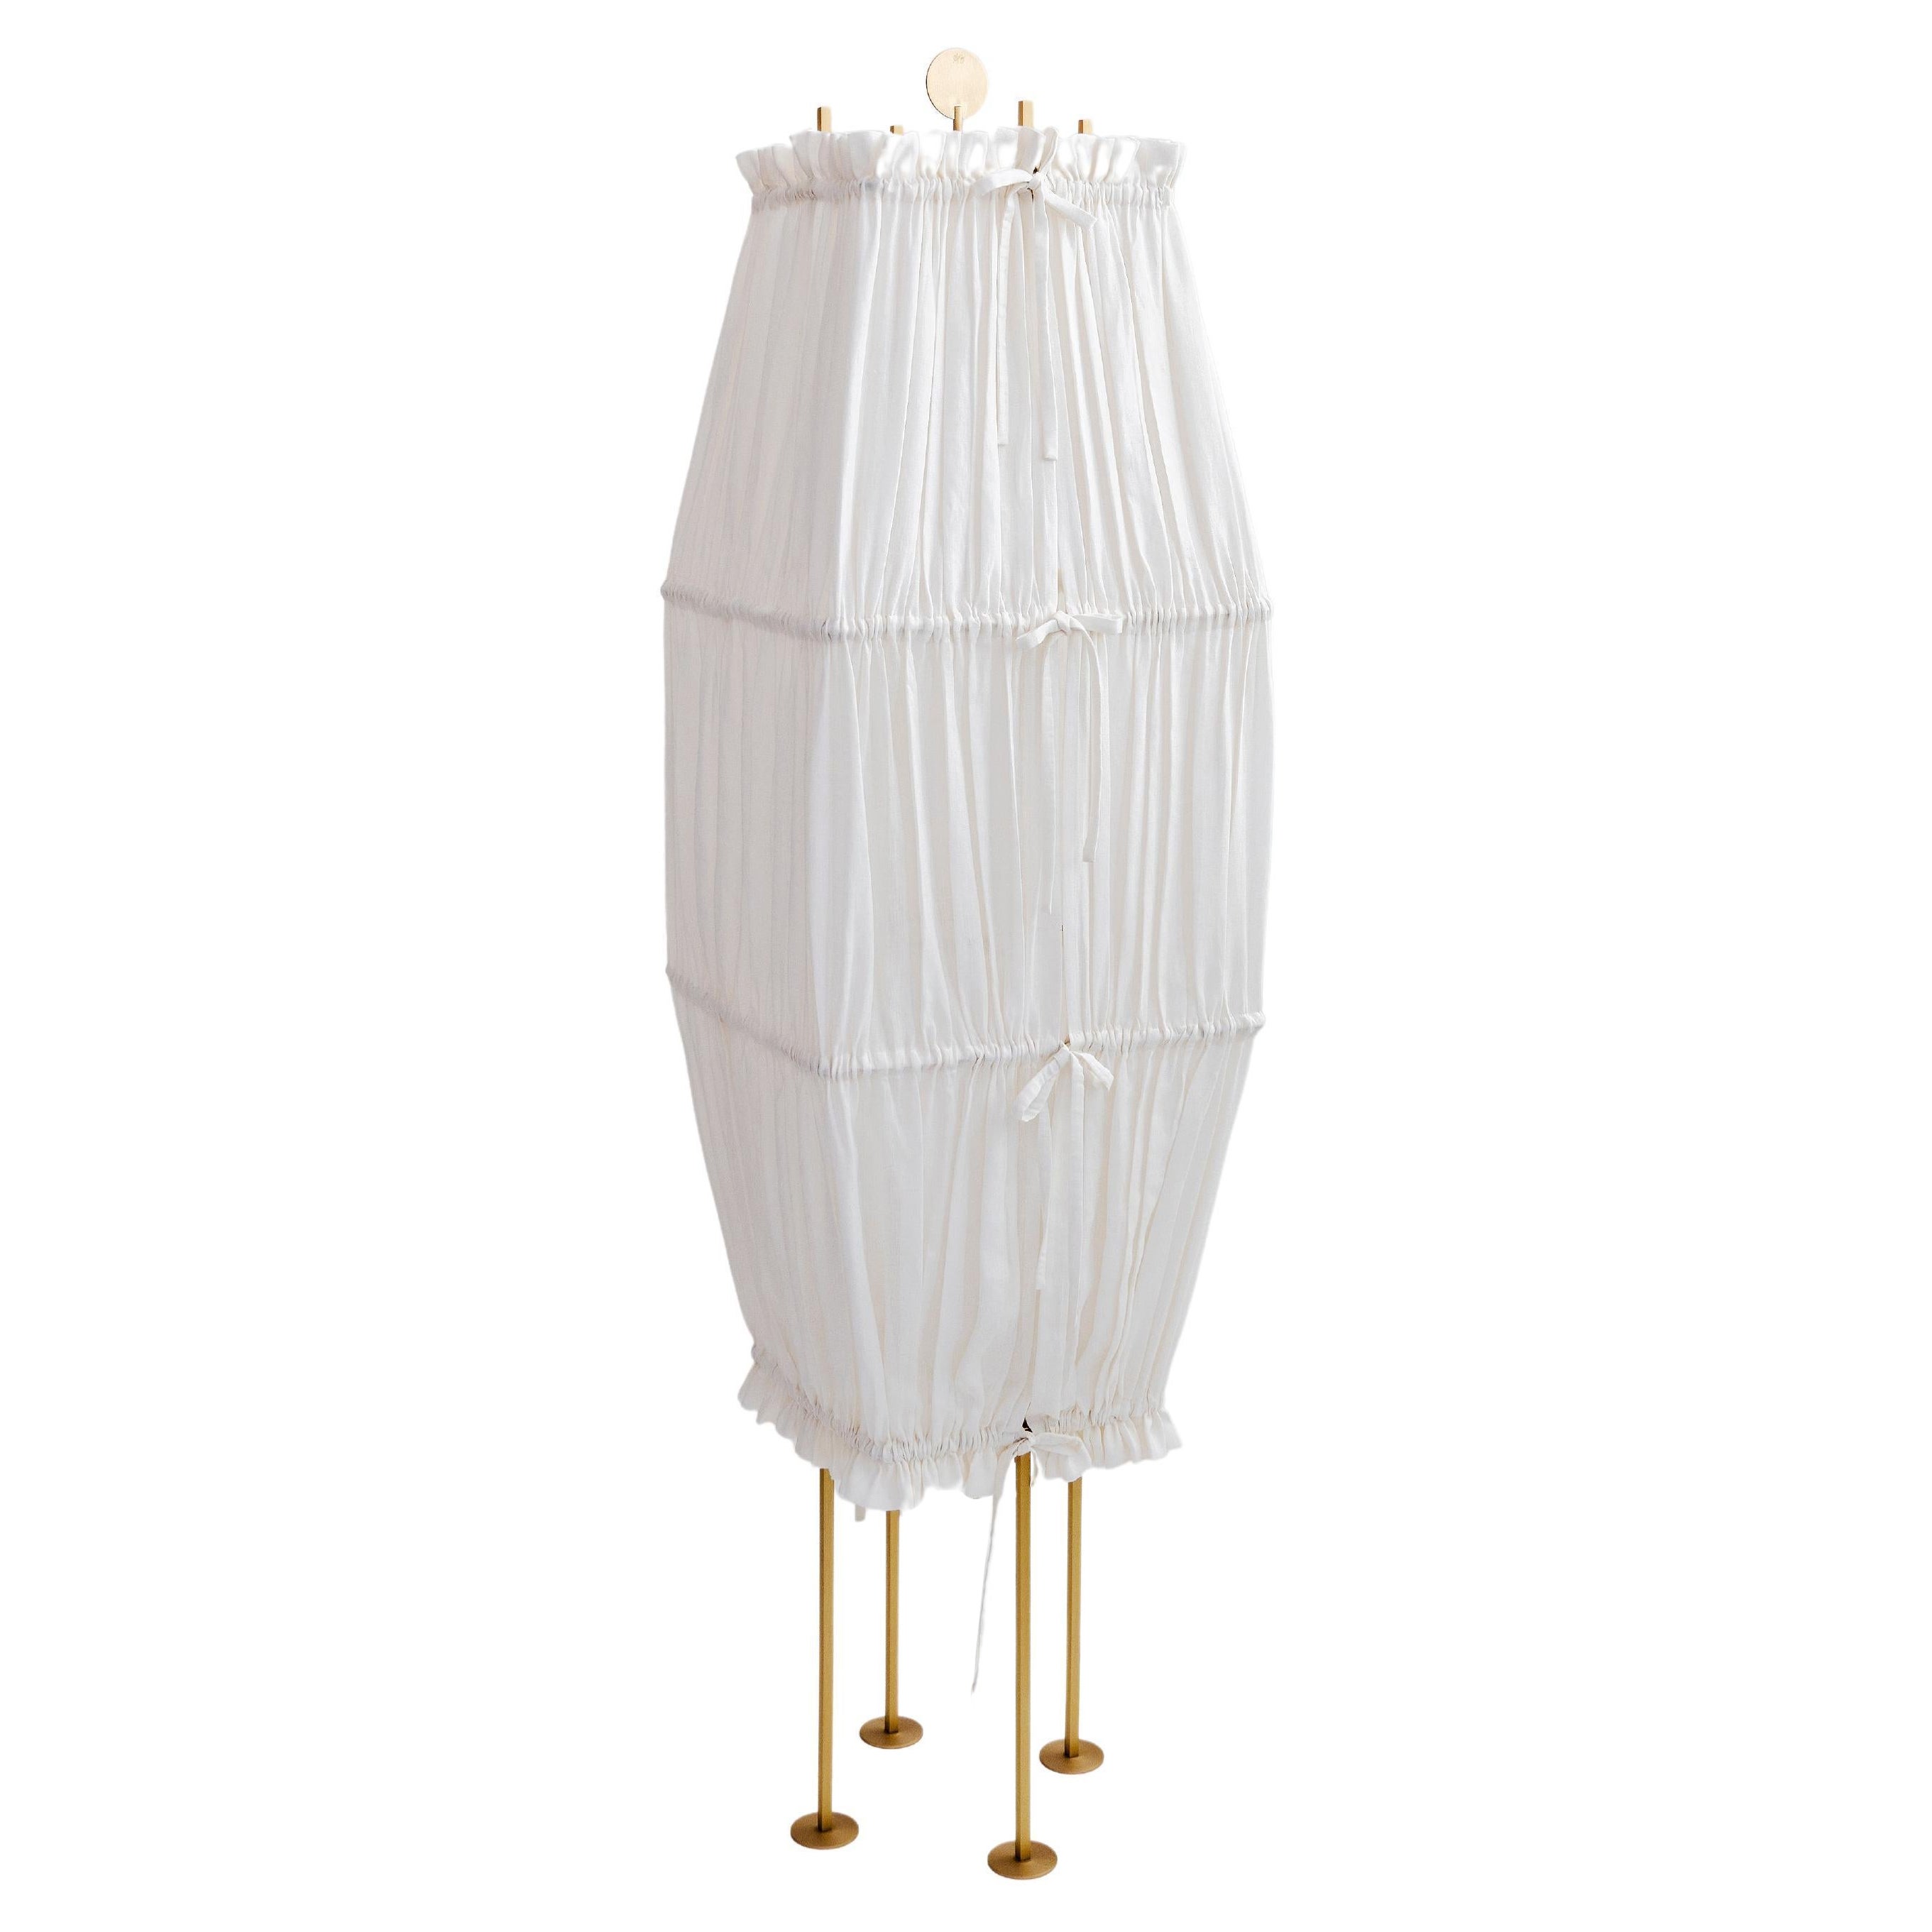 Large Presenza Floor Lamp by Agustina Bottoni For Sale